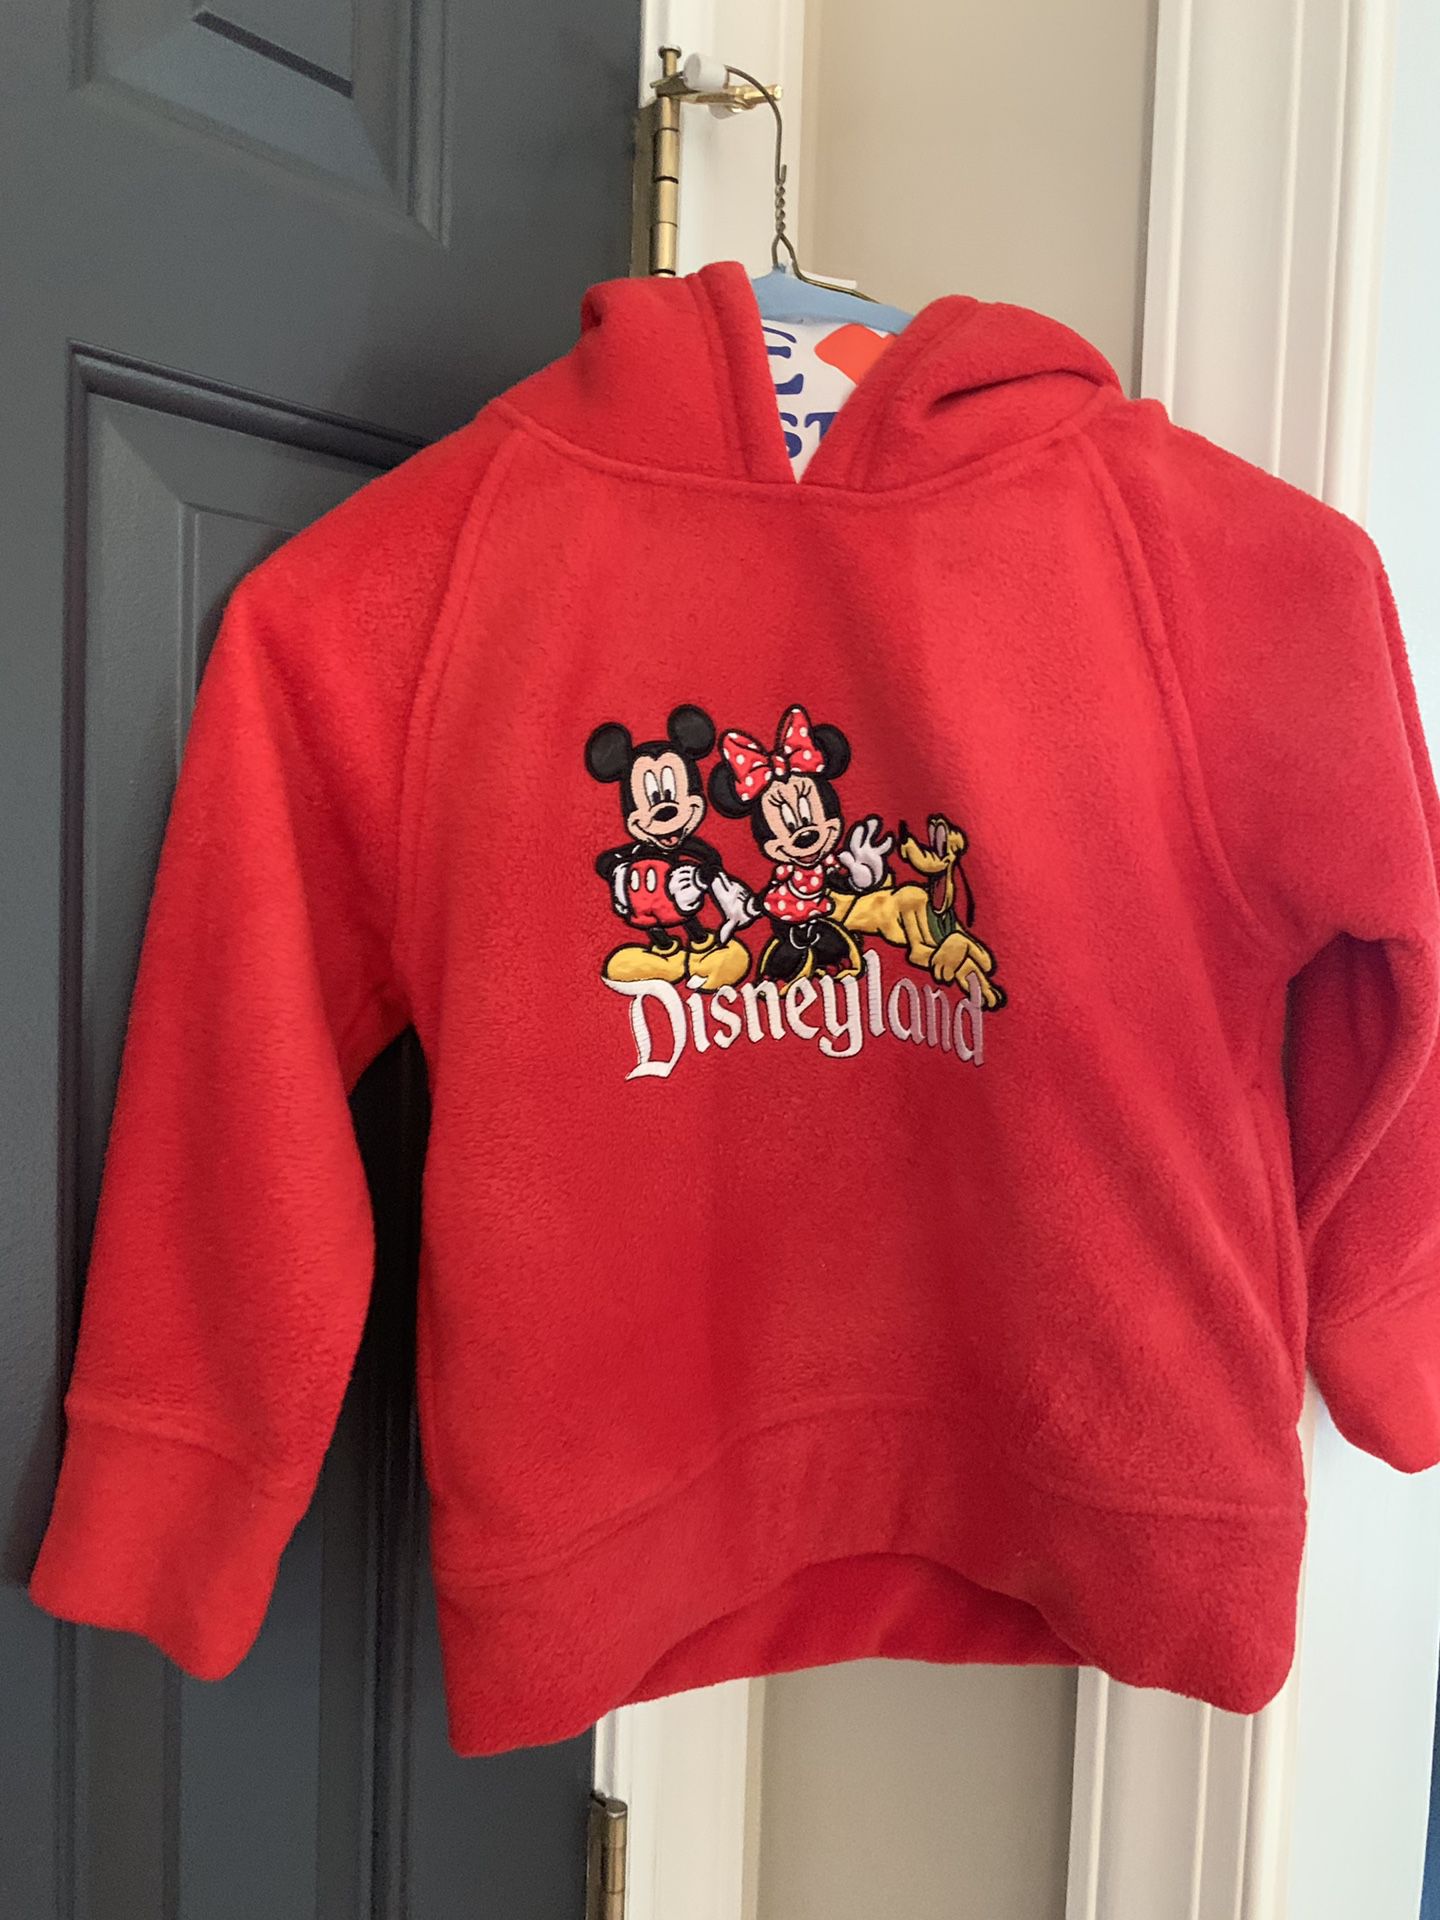 Girl size small Disney red hoodie